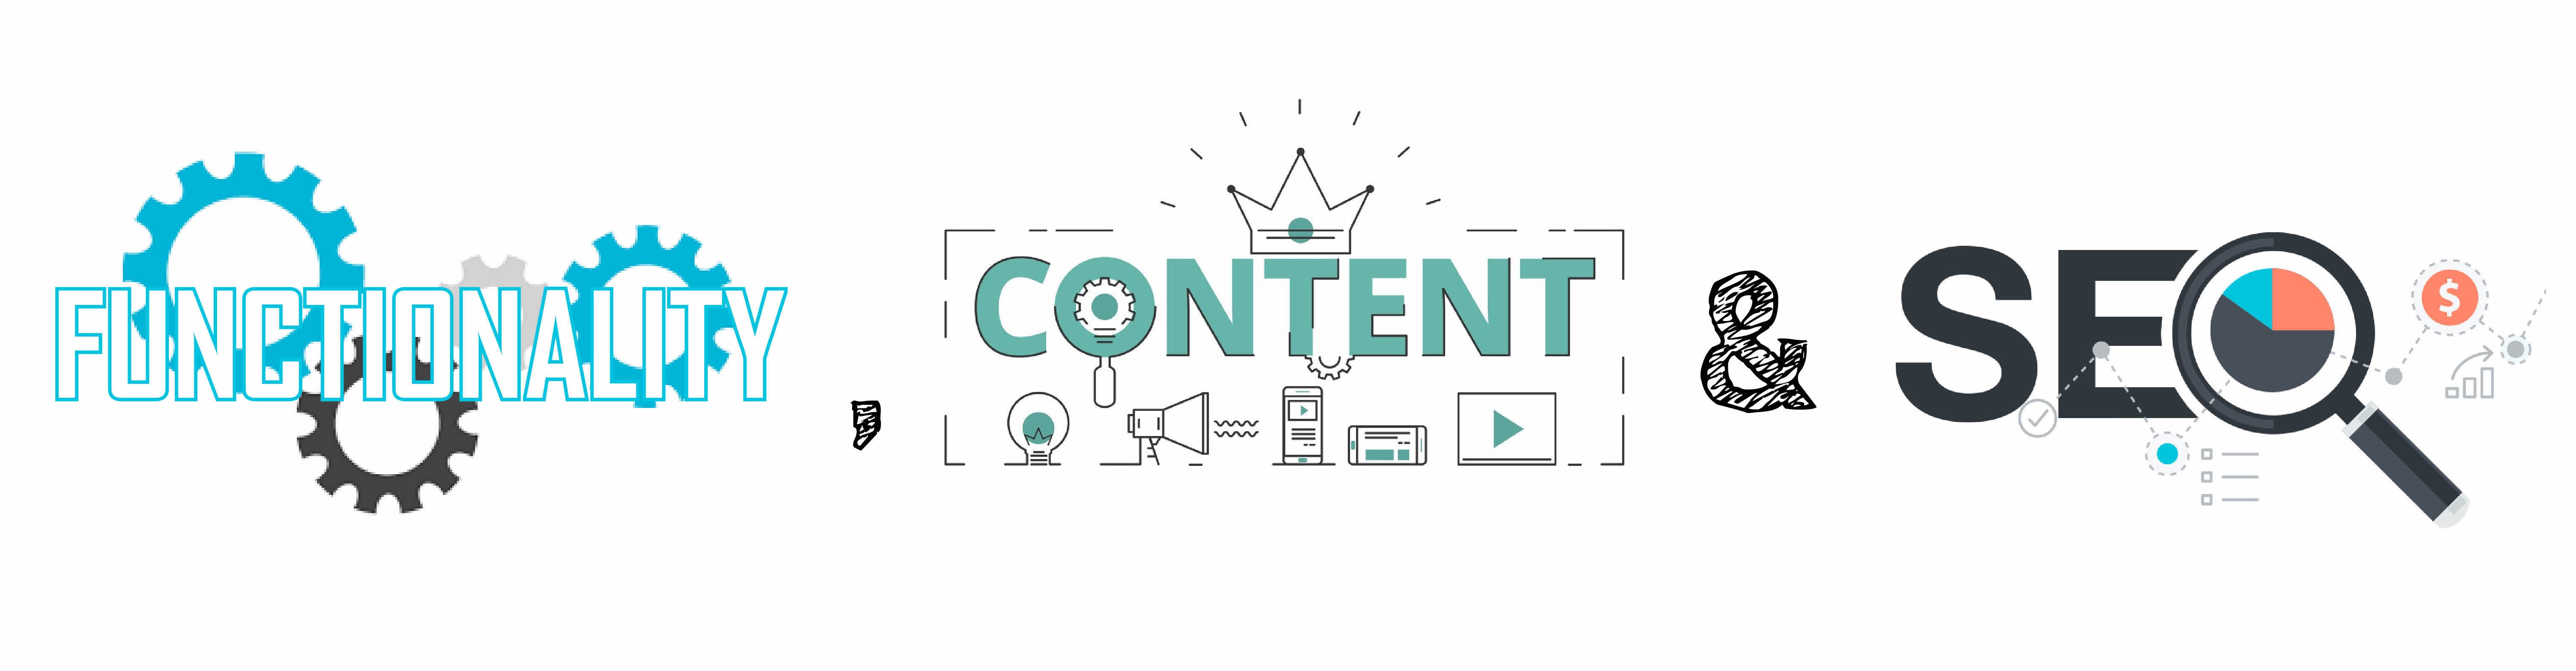 Content,functionality,SEO Graphic